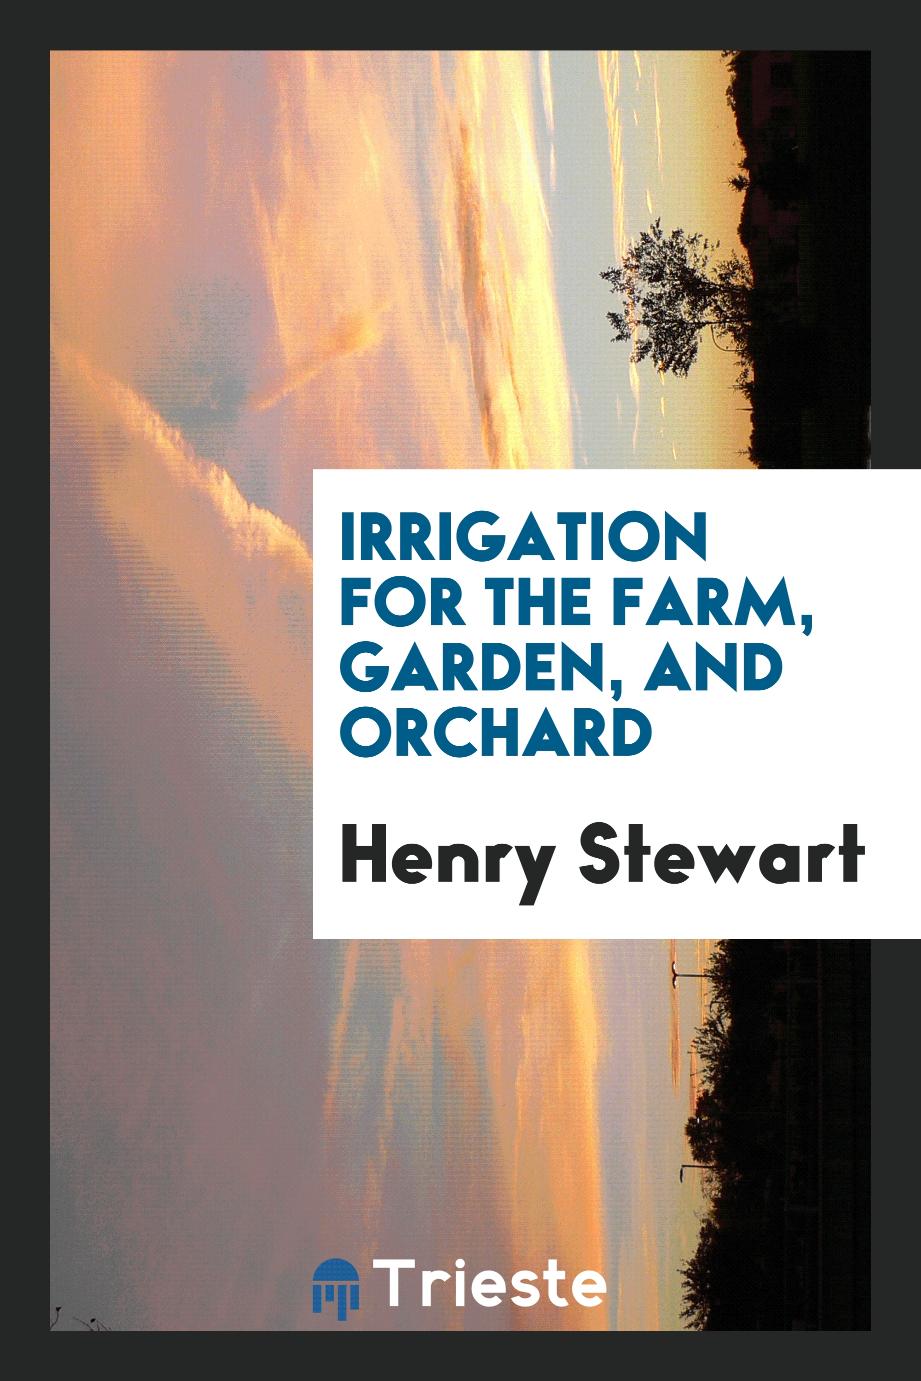 Irrigation for the Farm, Garden, and Orchard